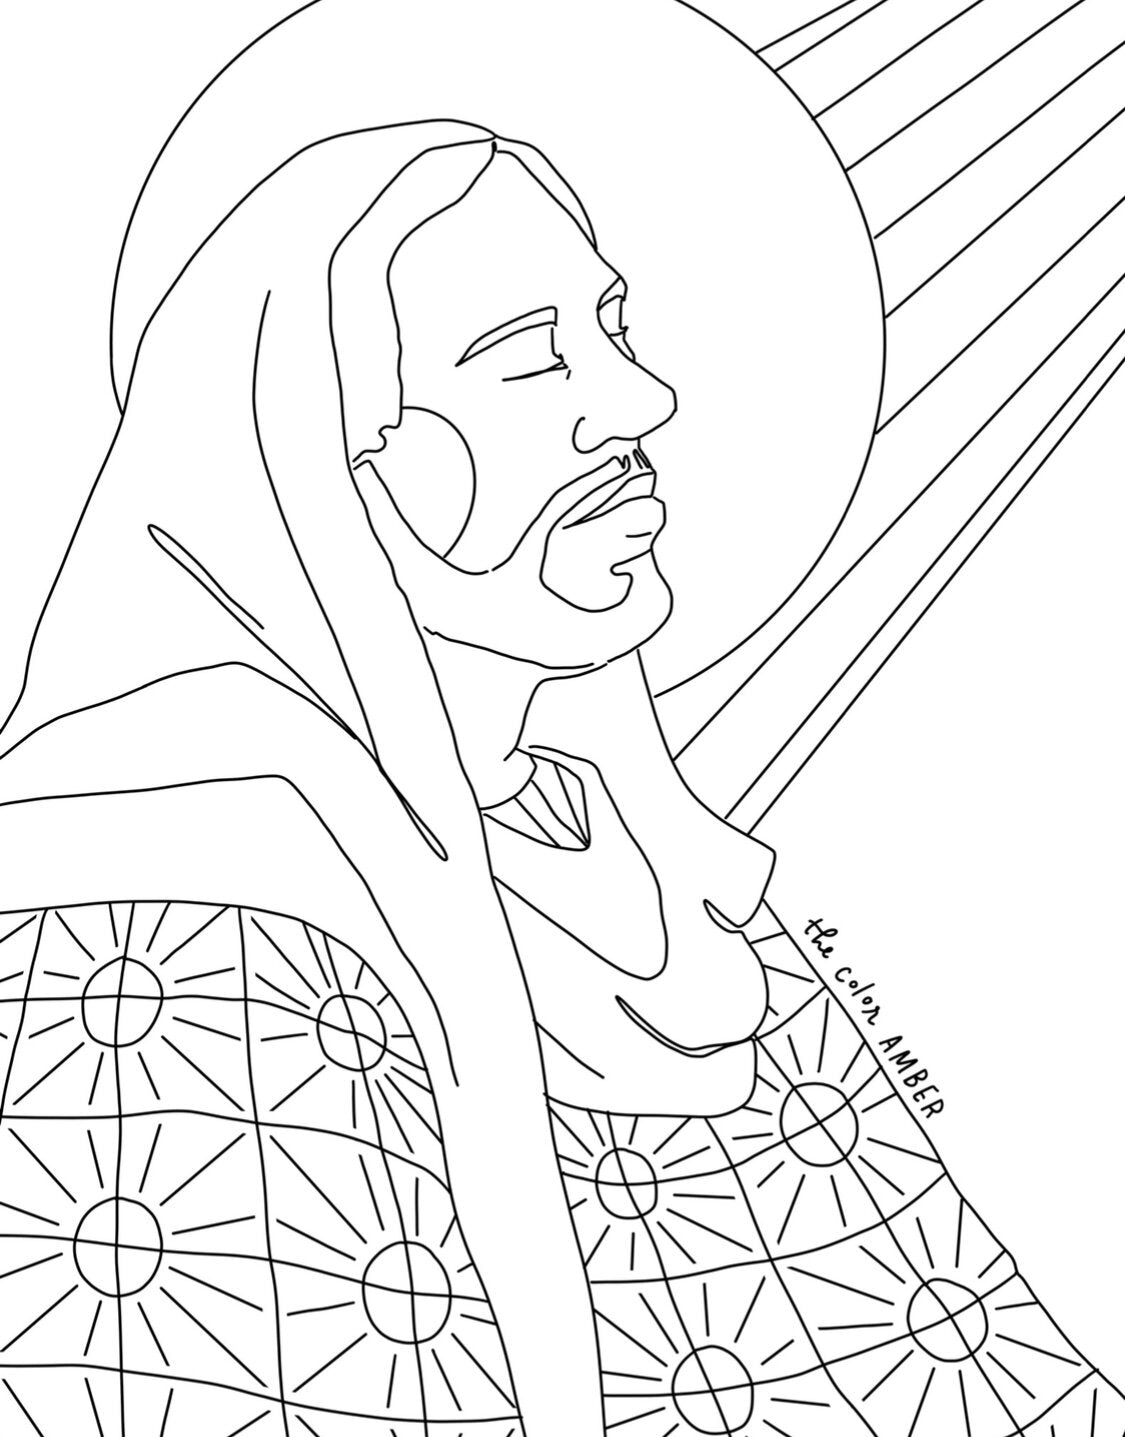 Fall 2021 - FREE Coloring Pages